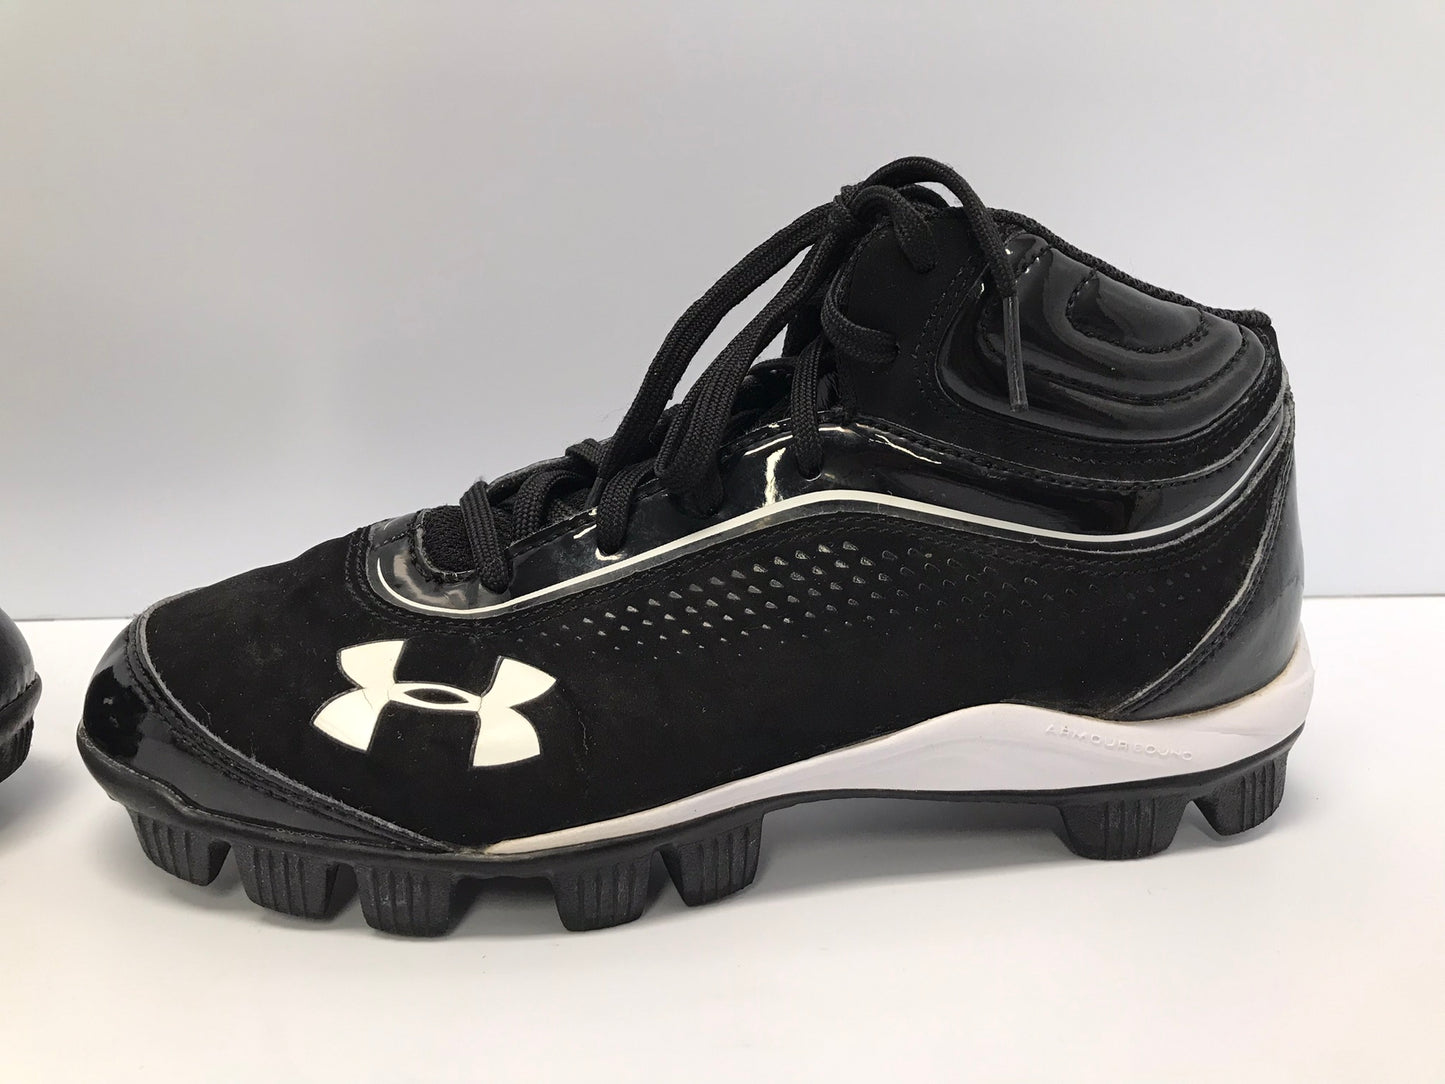 Baseball Shoes Cleats Child Size 5 Under Armour Black White High Top